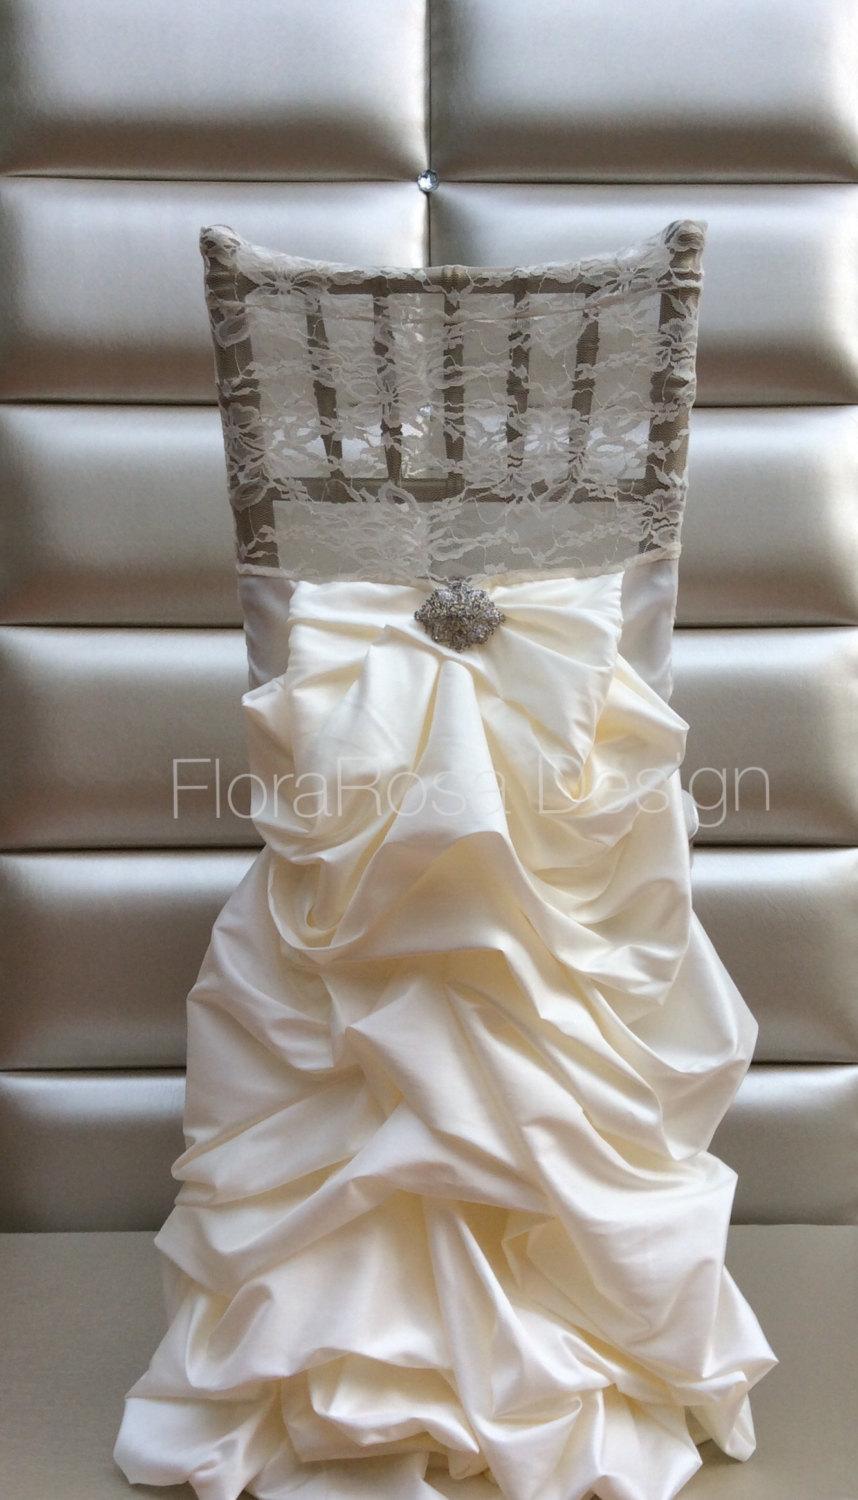 Mariage - ONLY TODAY!!! Half-price!Chair covers,wedding chair cover, chiavari chair cover, wedding decoration, unique ceremony decor,